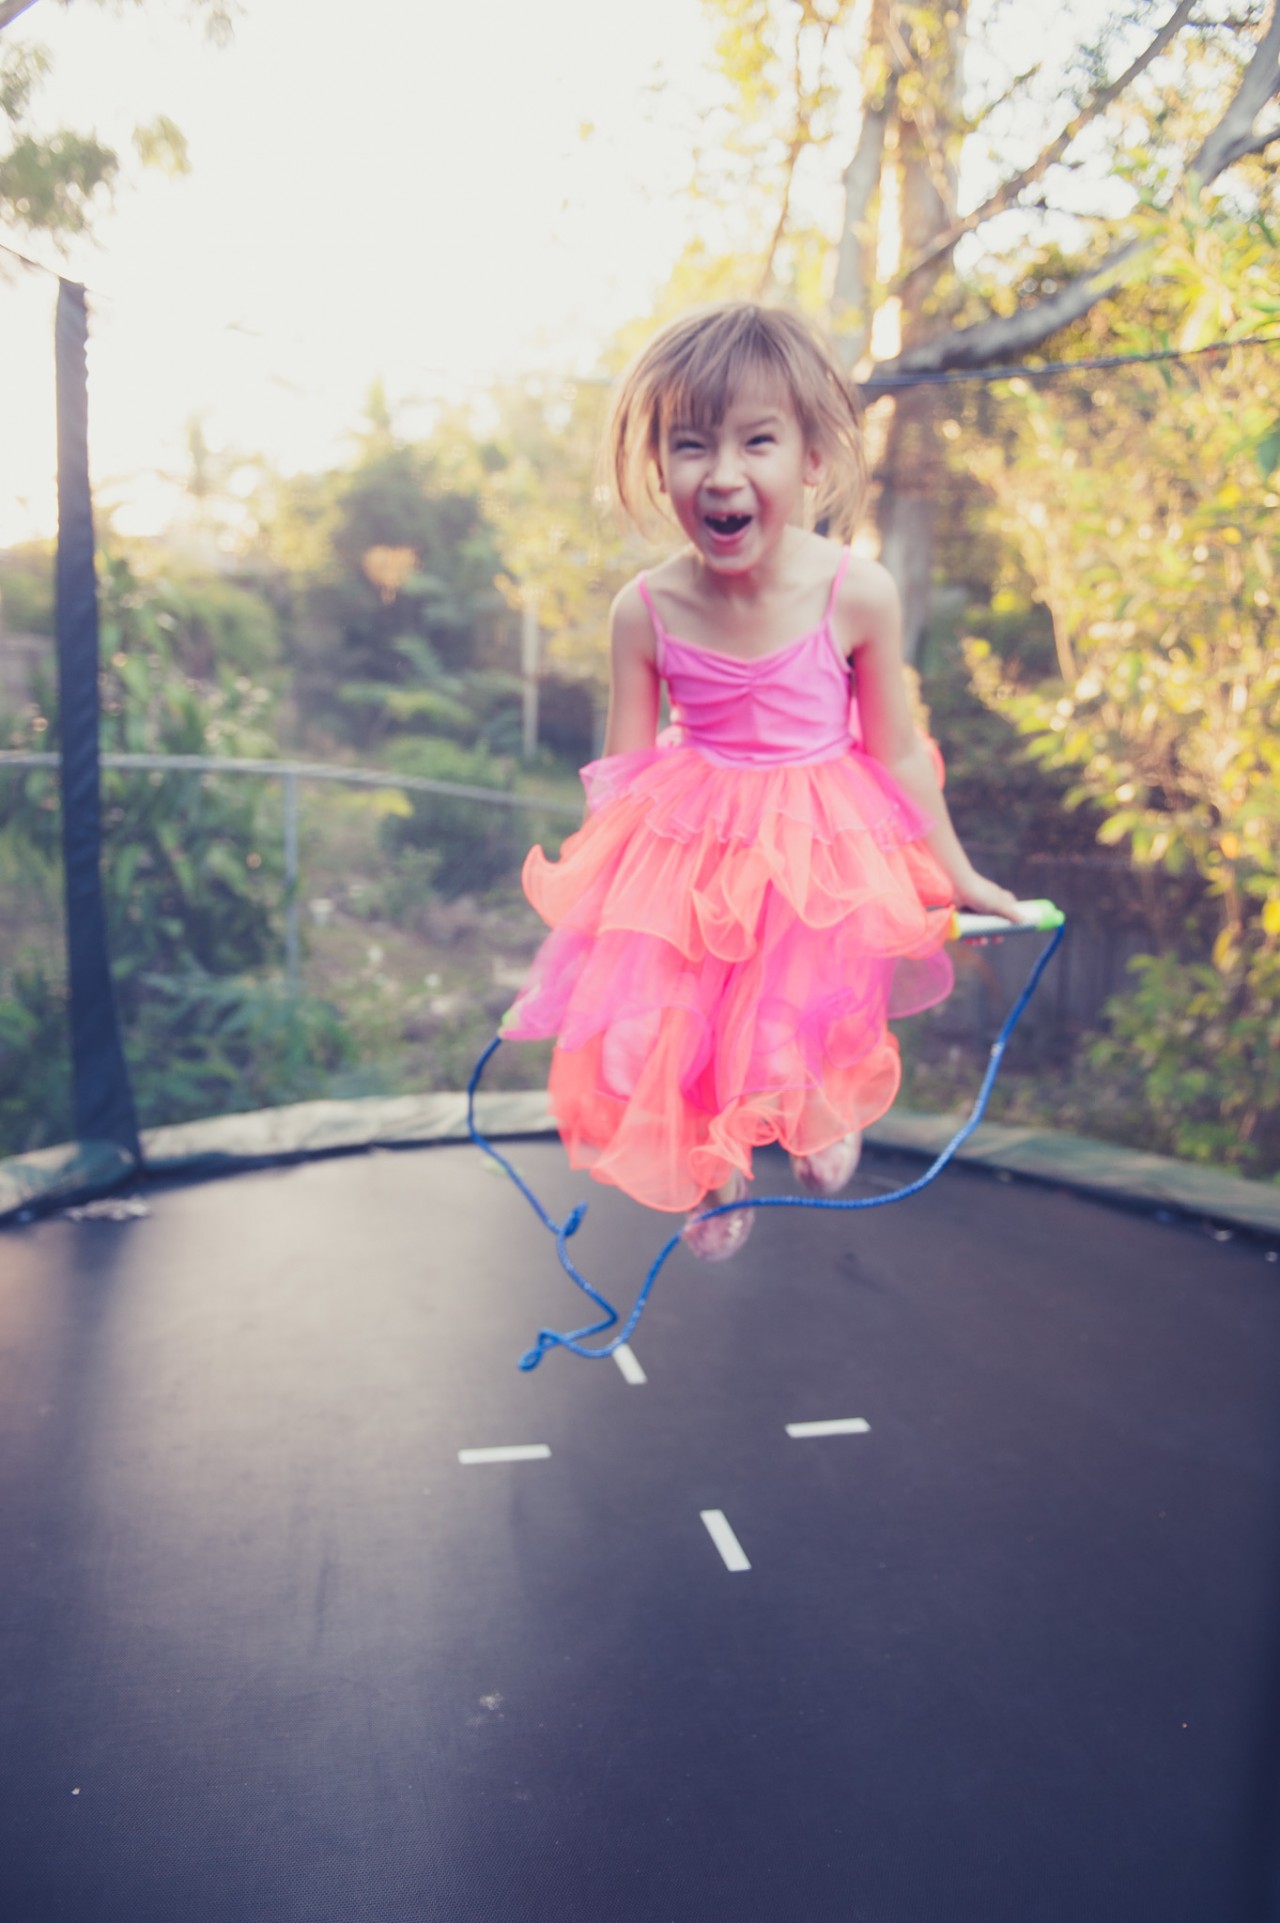 Olivia having a play on the trampoline